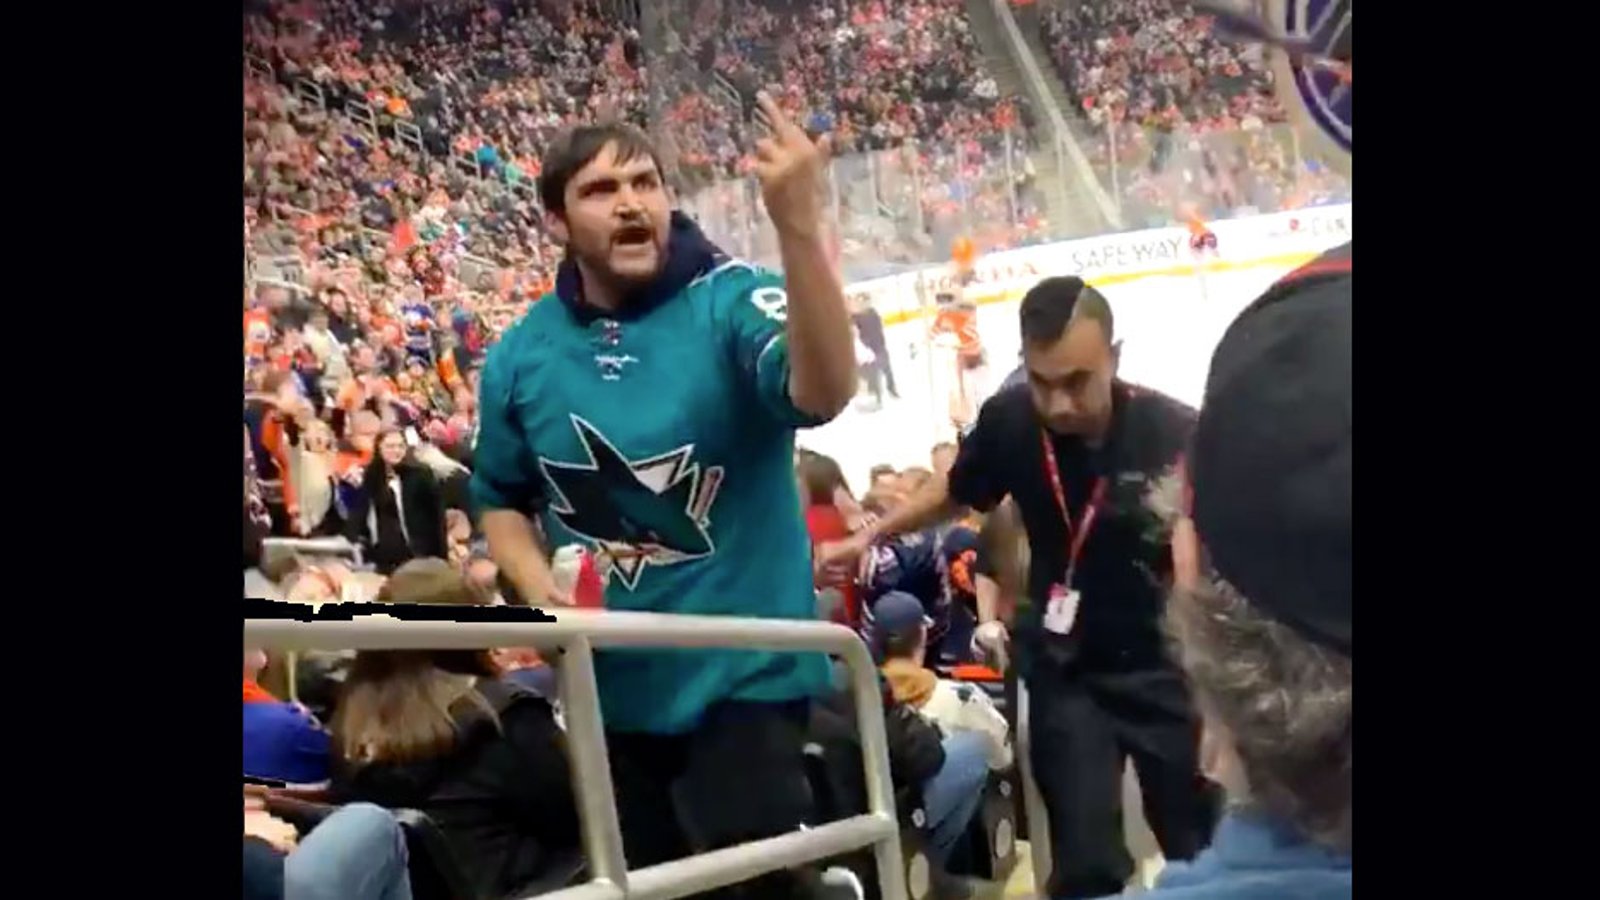 Drunk Sharks fan gets tossed from game and throws beer in Oilers fan’s face! 